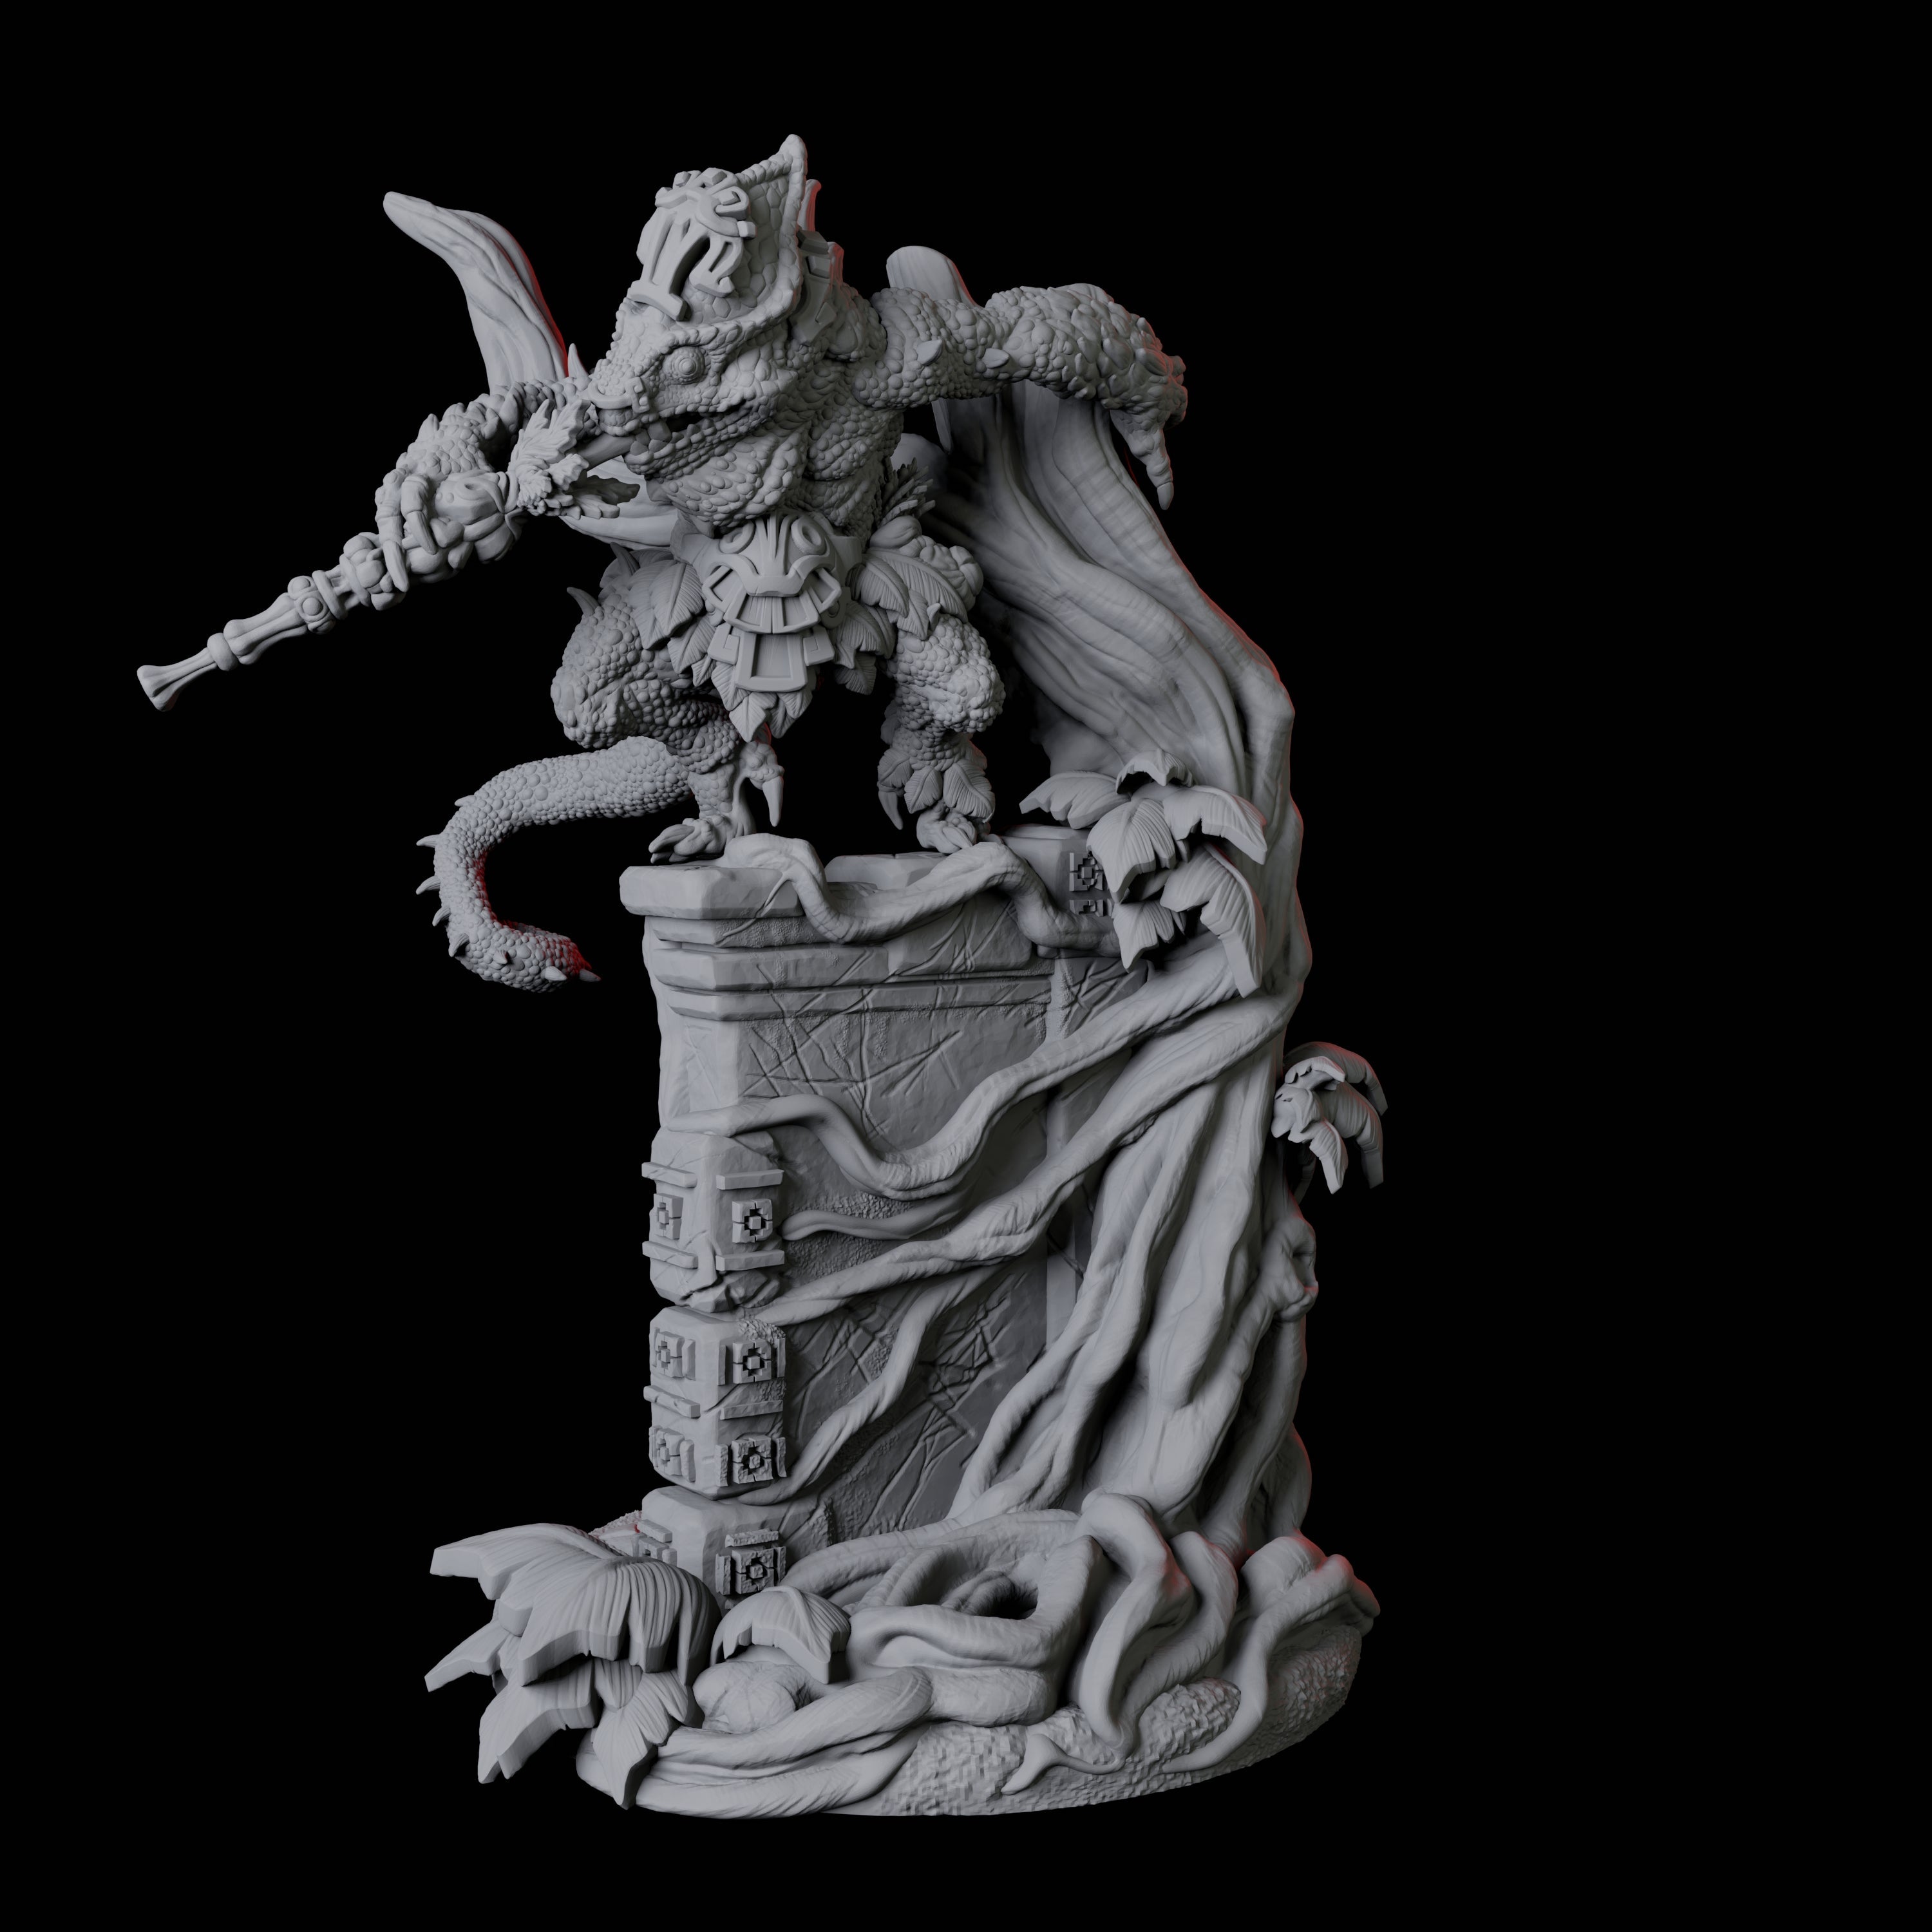 Grung Rogue C Miniature for Dungeons and Dragons, Pathfinder or other TTRPGs